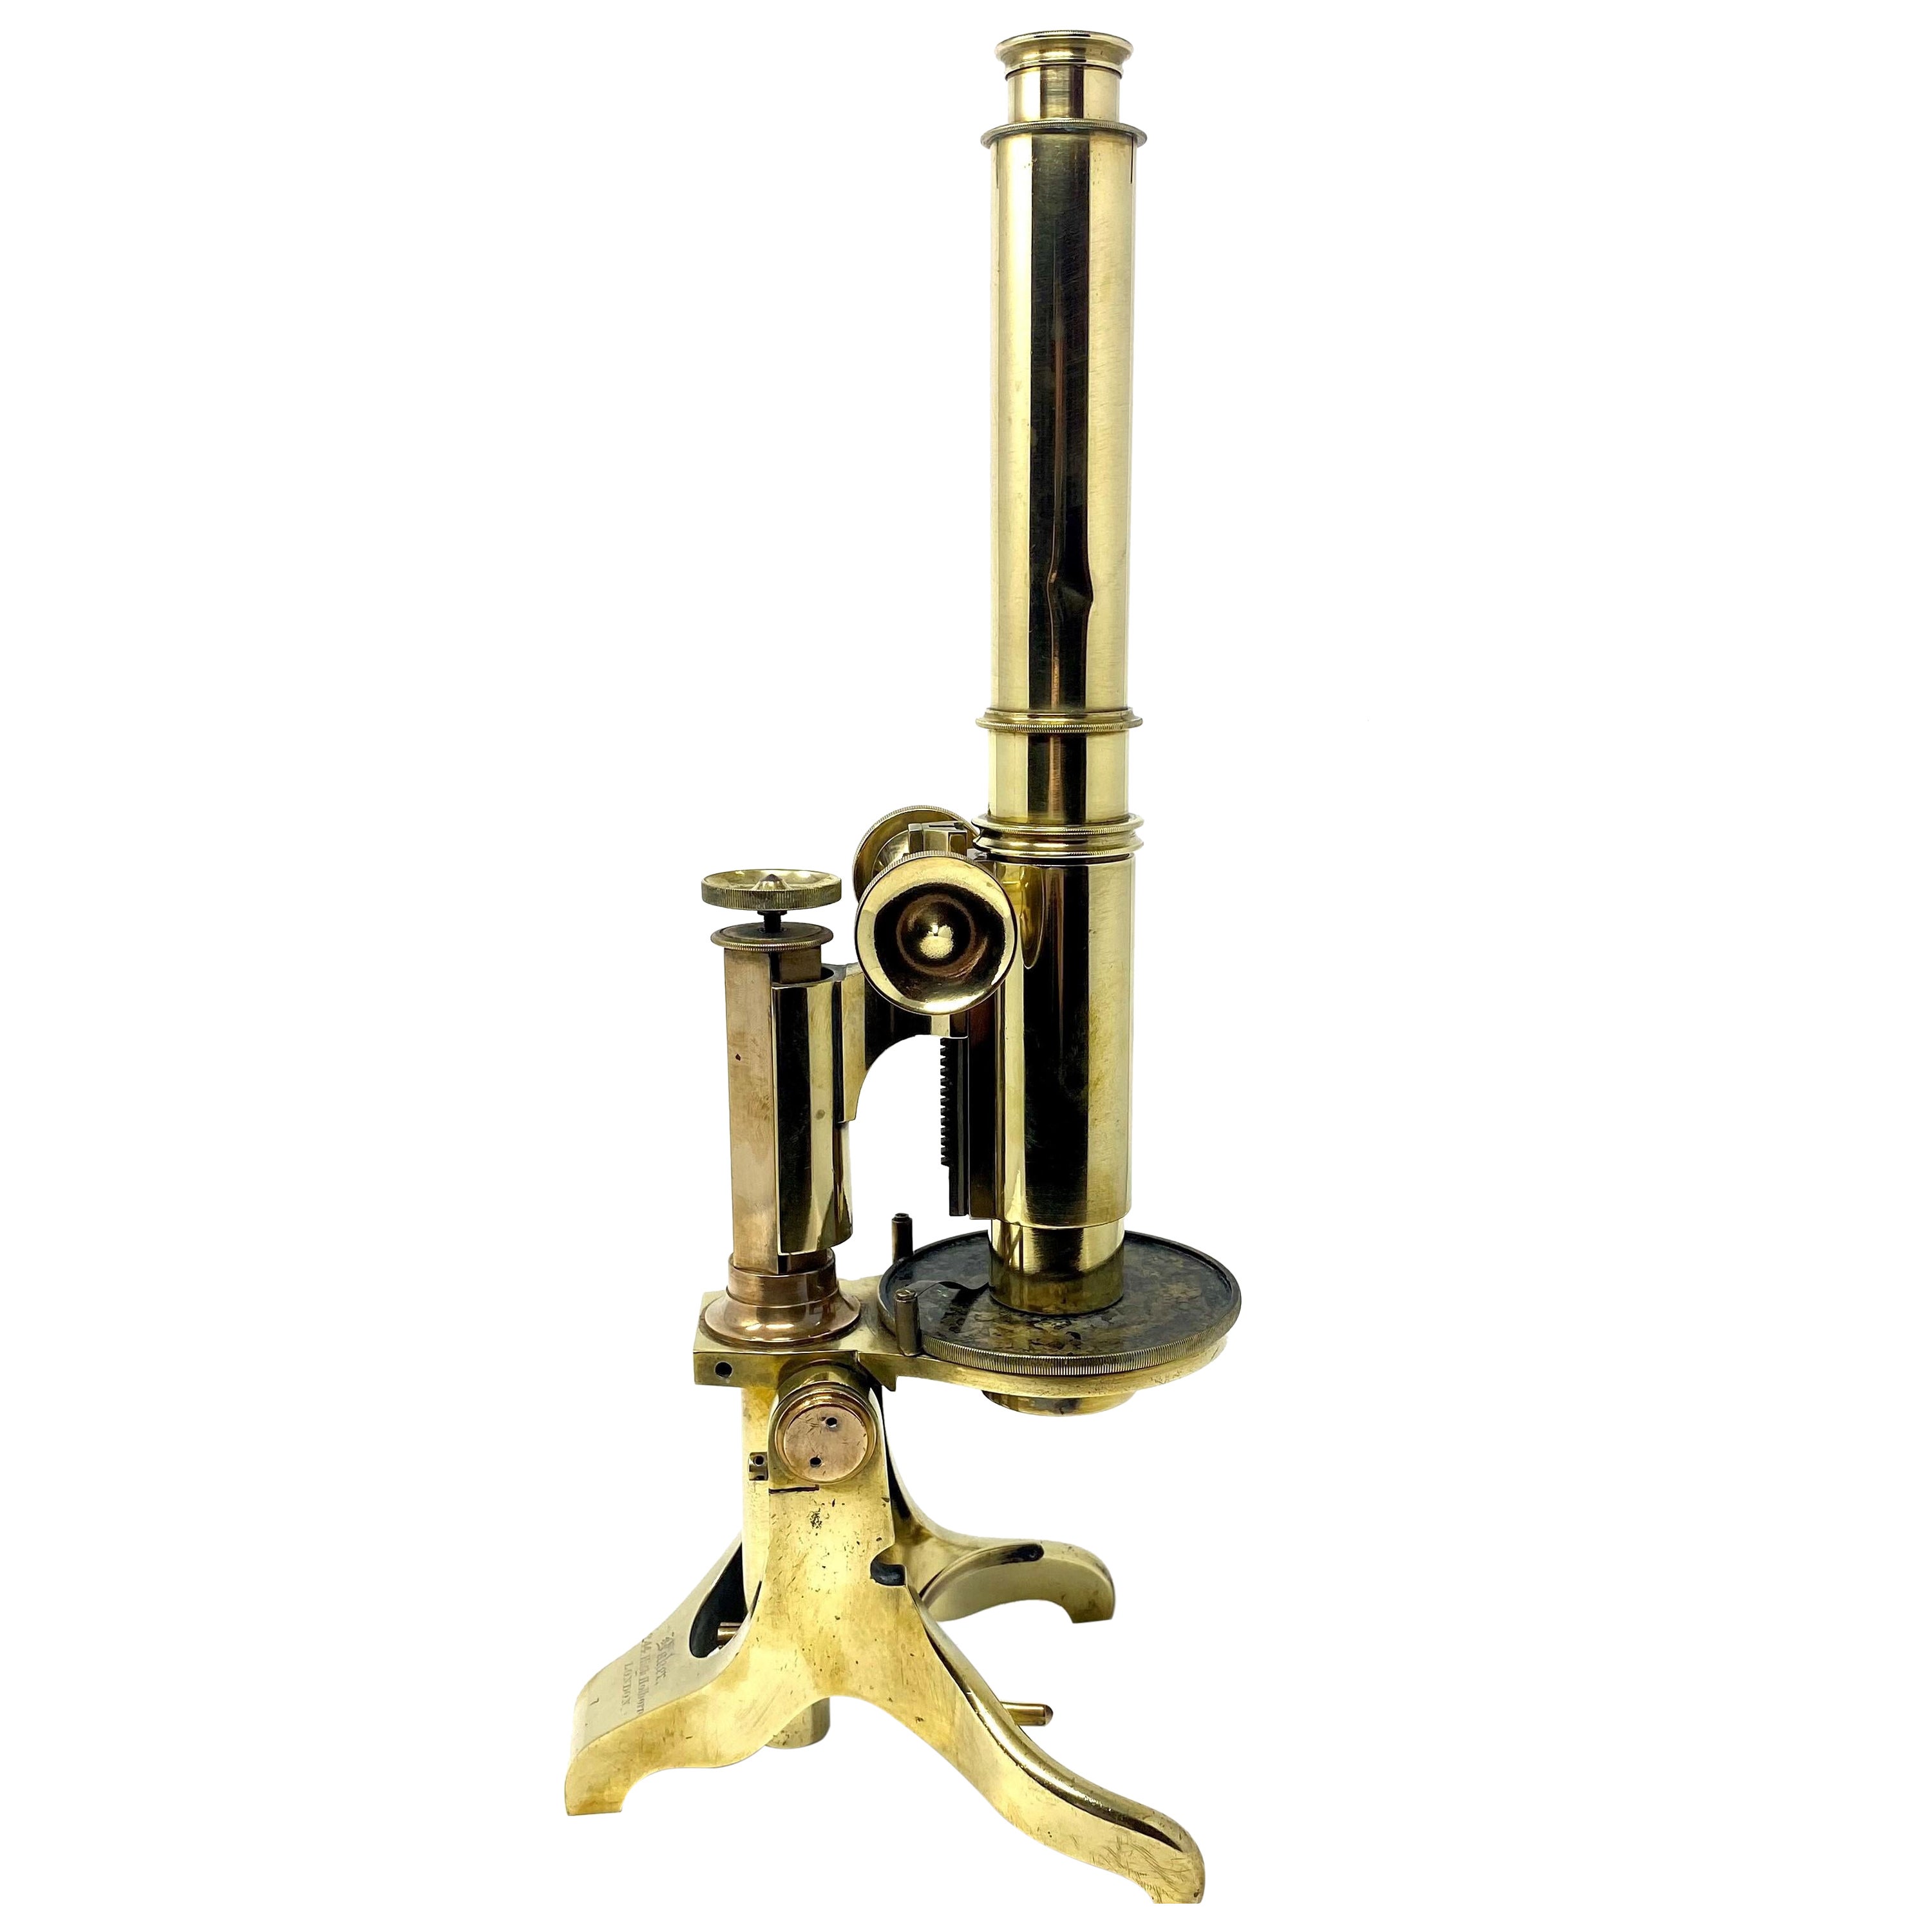 Antique English London-Made Microscope by Charles Baker, Model 7 Circa 1890-1905